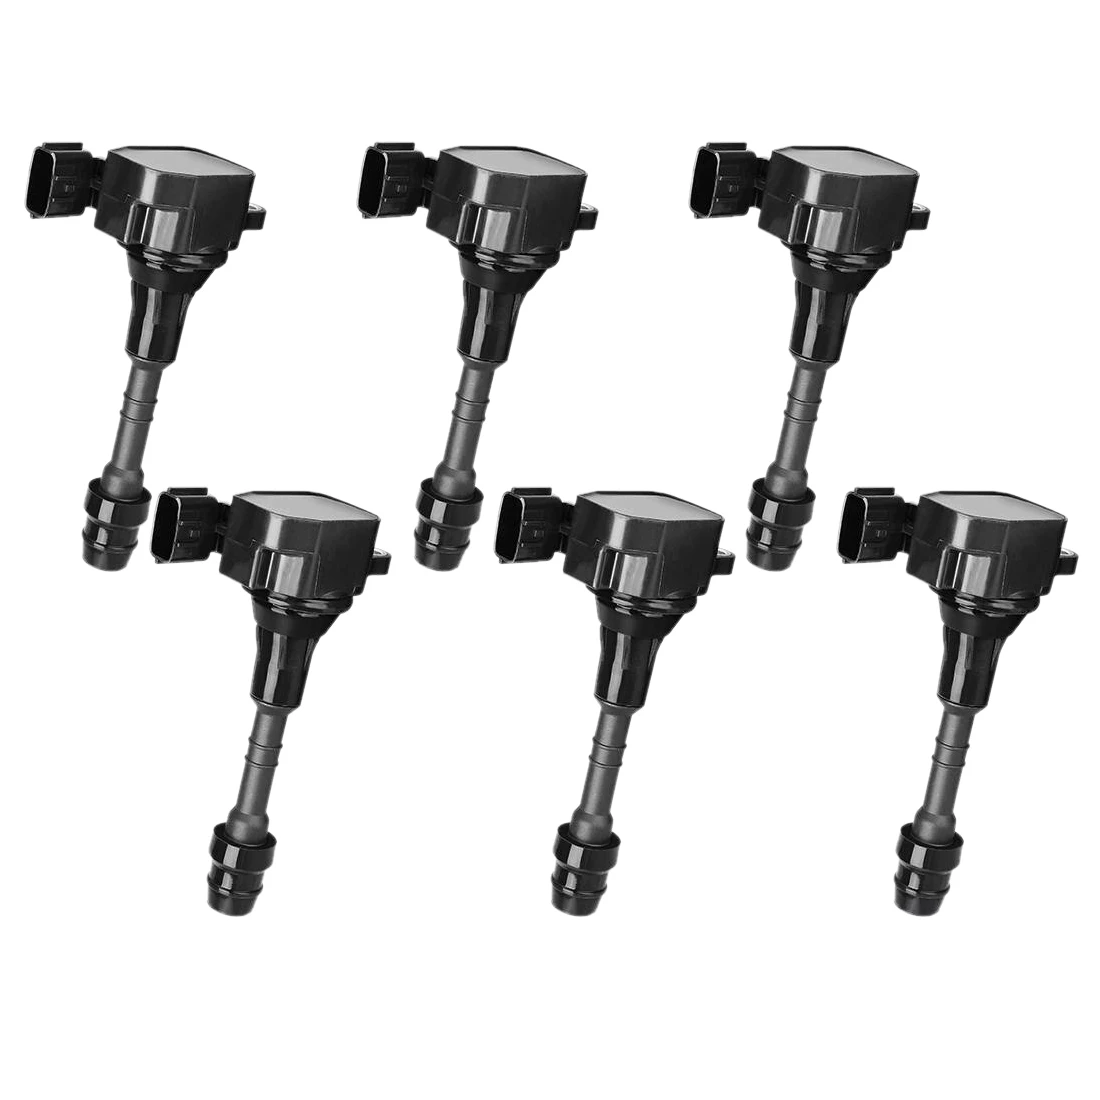 

Pack of 6 Ignition Coil for 03-09 Infiniti FX35 G35 M35 Nissan 350Z UF401